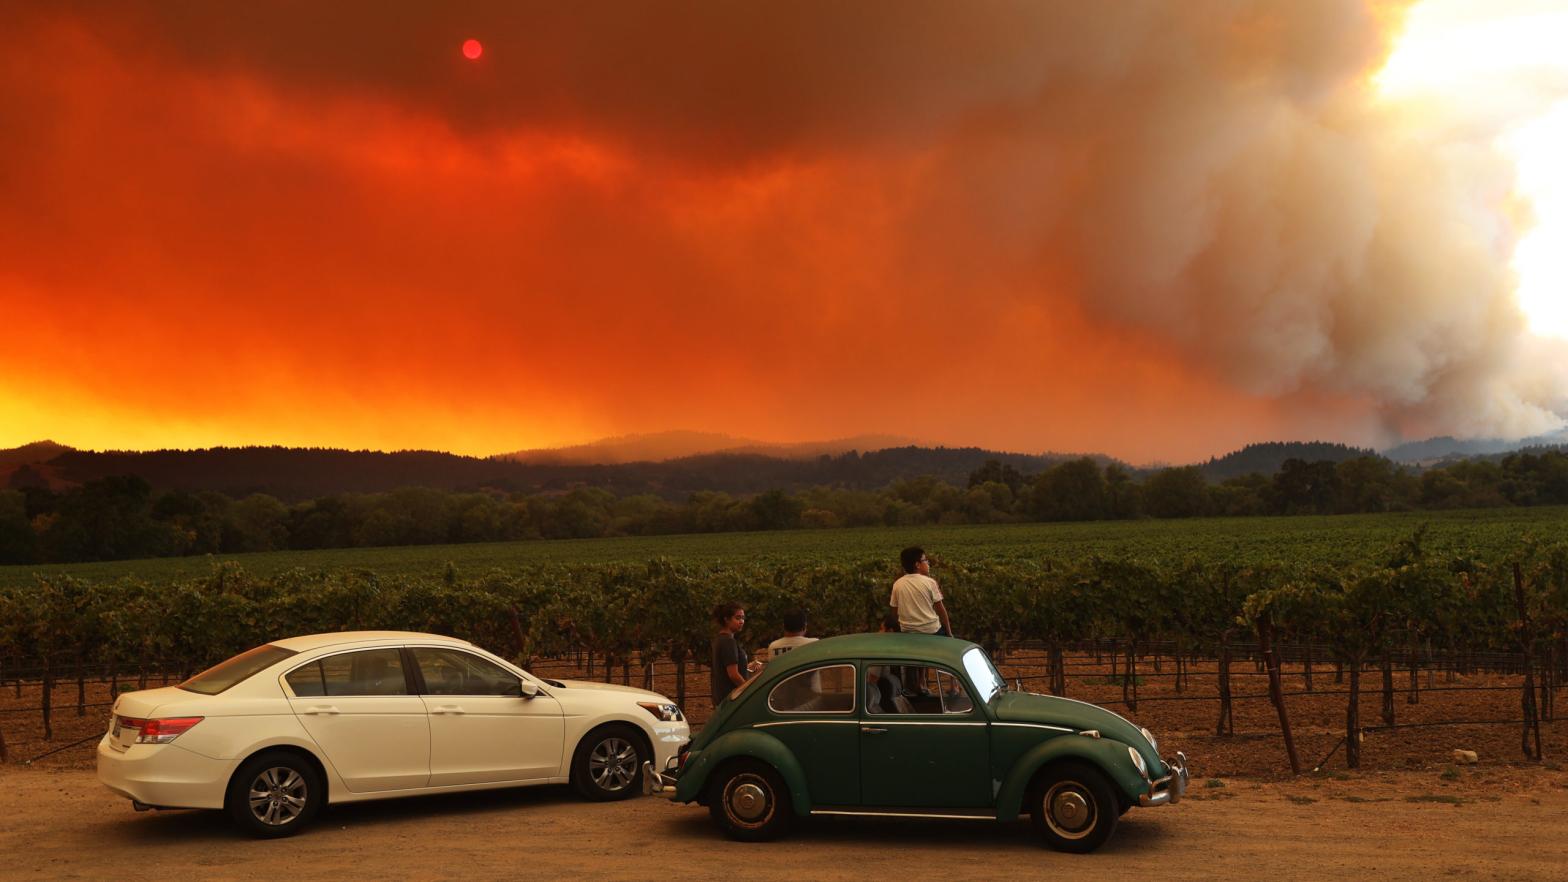 A wildfire burns over grape vines. (Photo: Justin Sullivan, Getty Images)